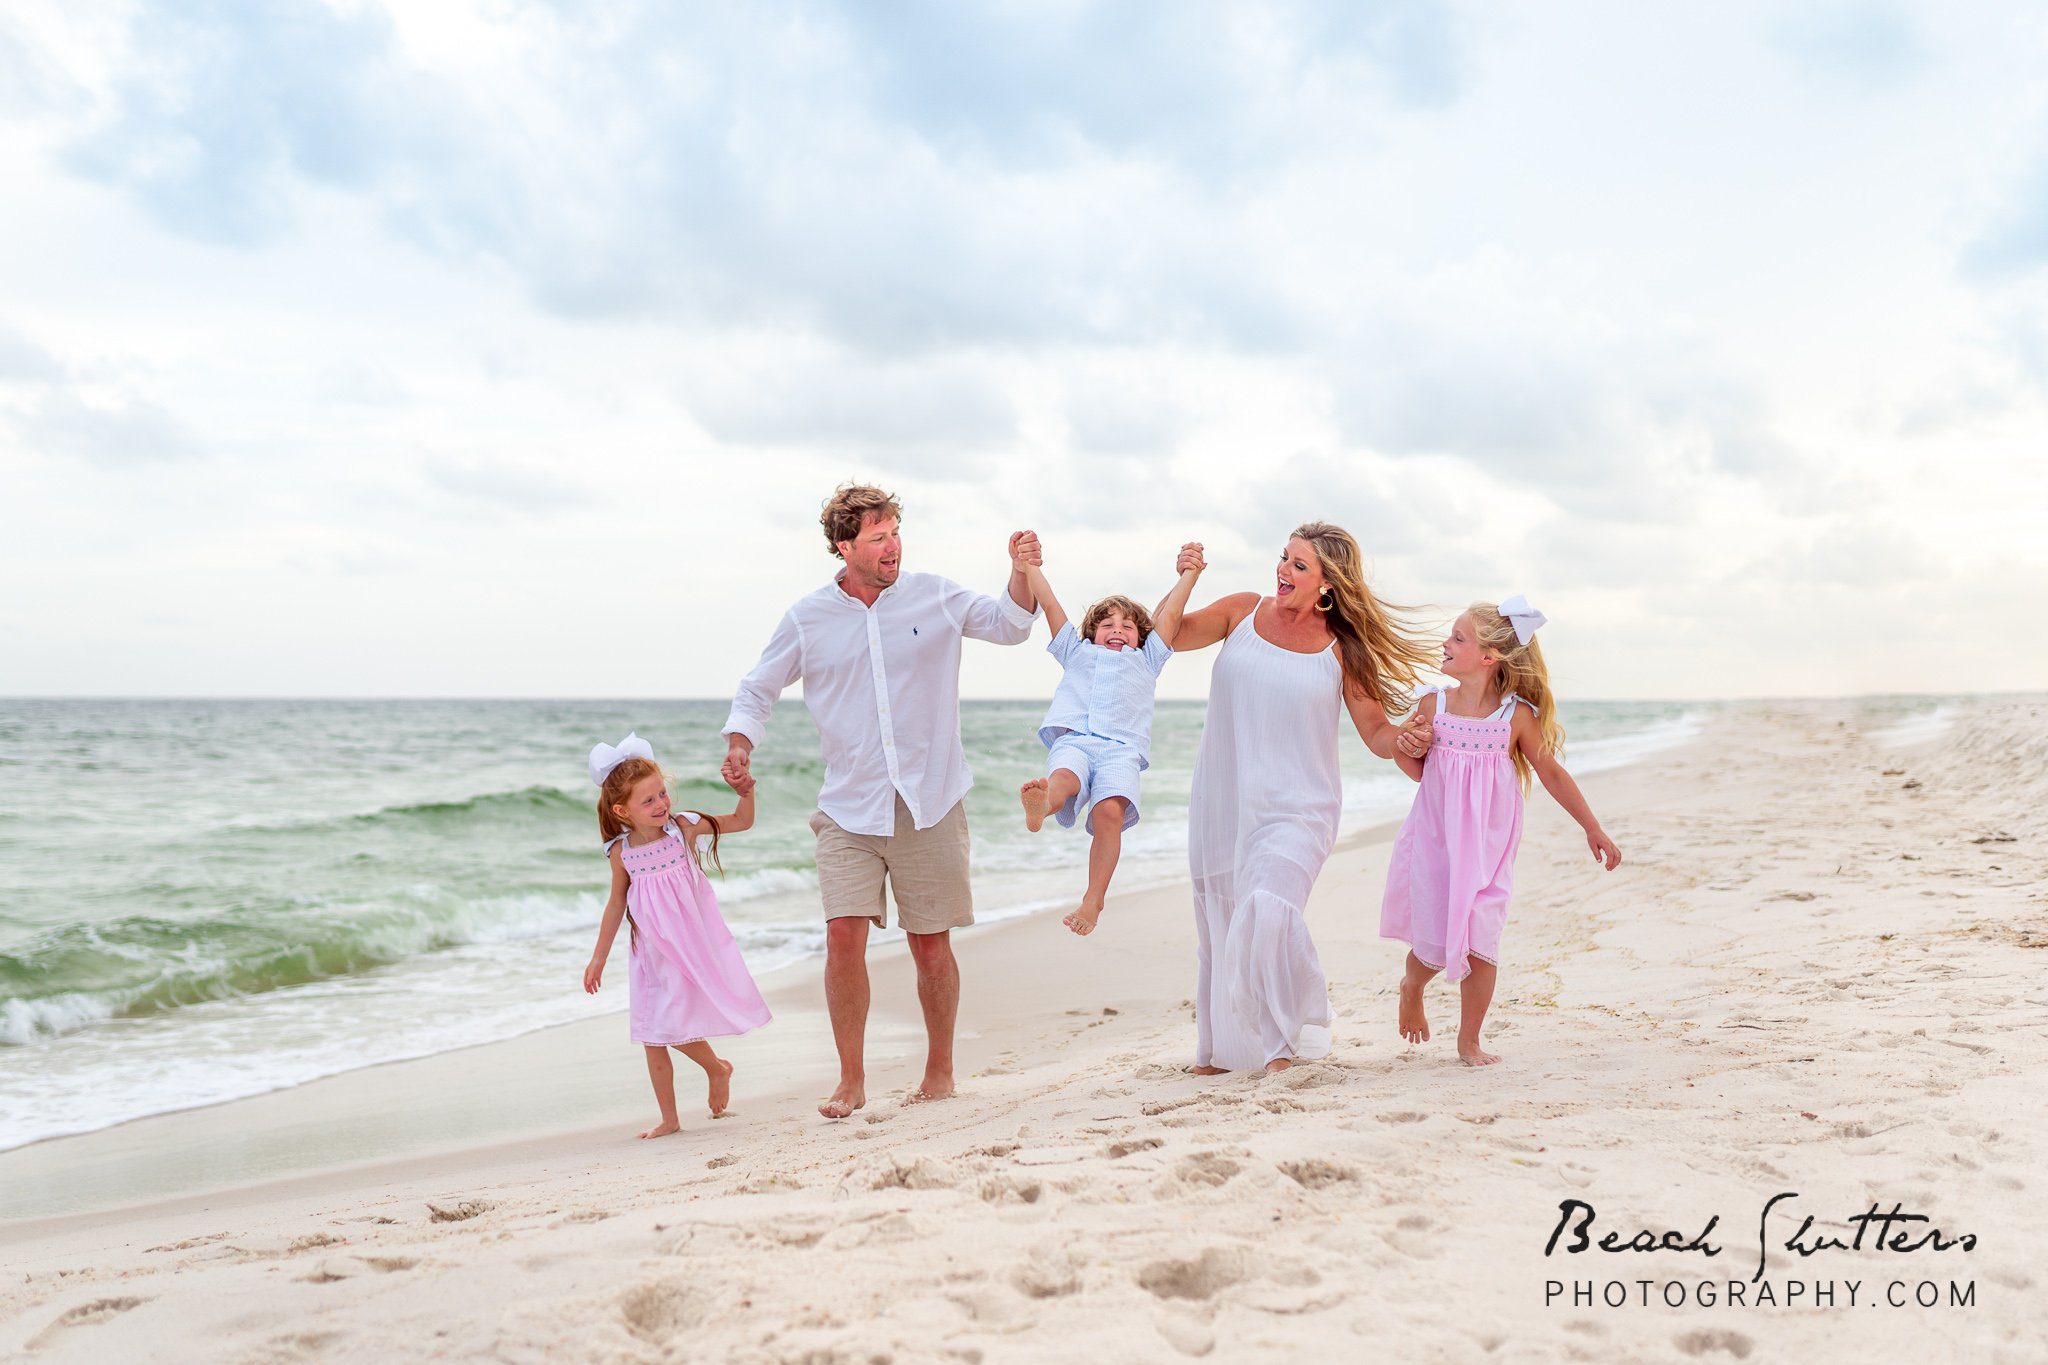 Beach Shutters photography photo mini sessions